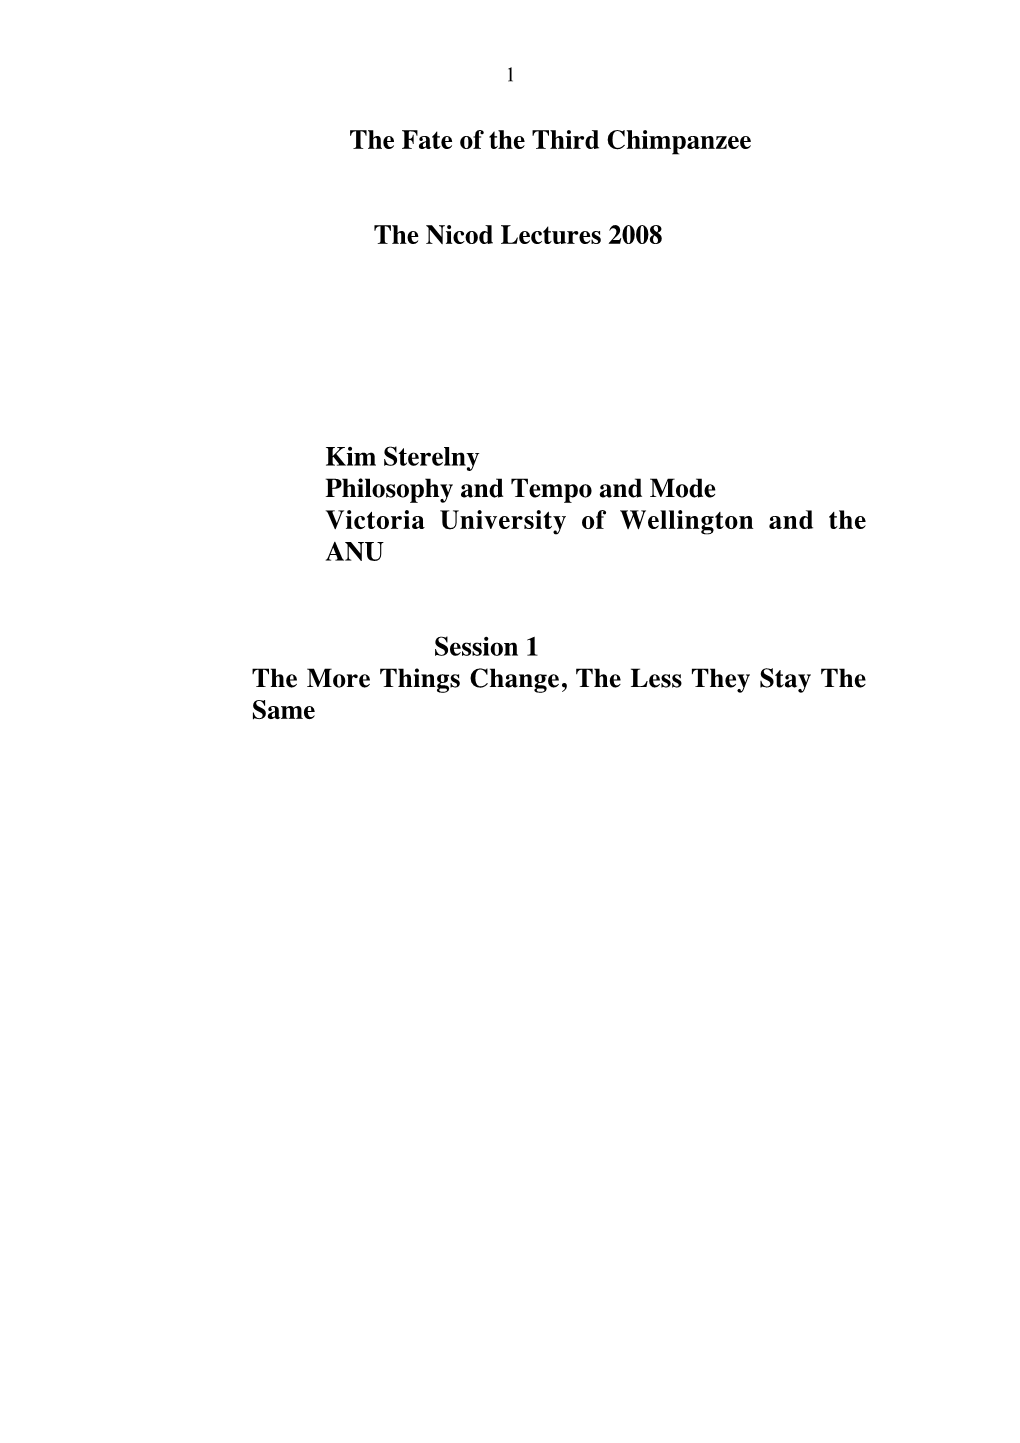 The Fate of the Third Chimpanzee the Nicod Lectures 2008 Kim Sterelny